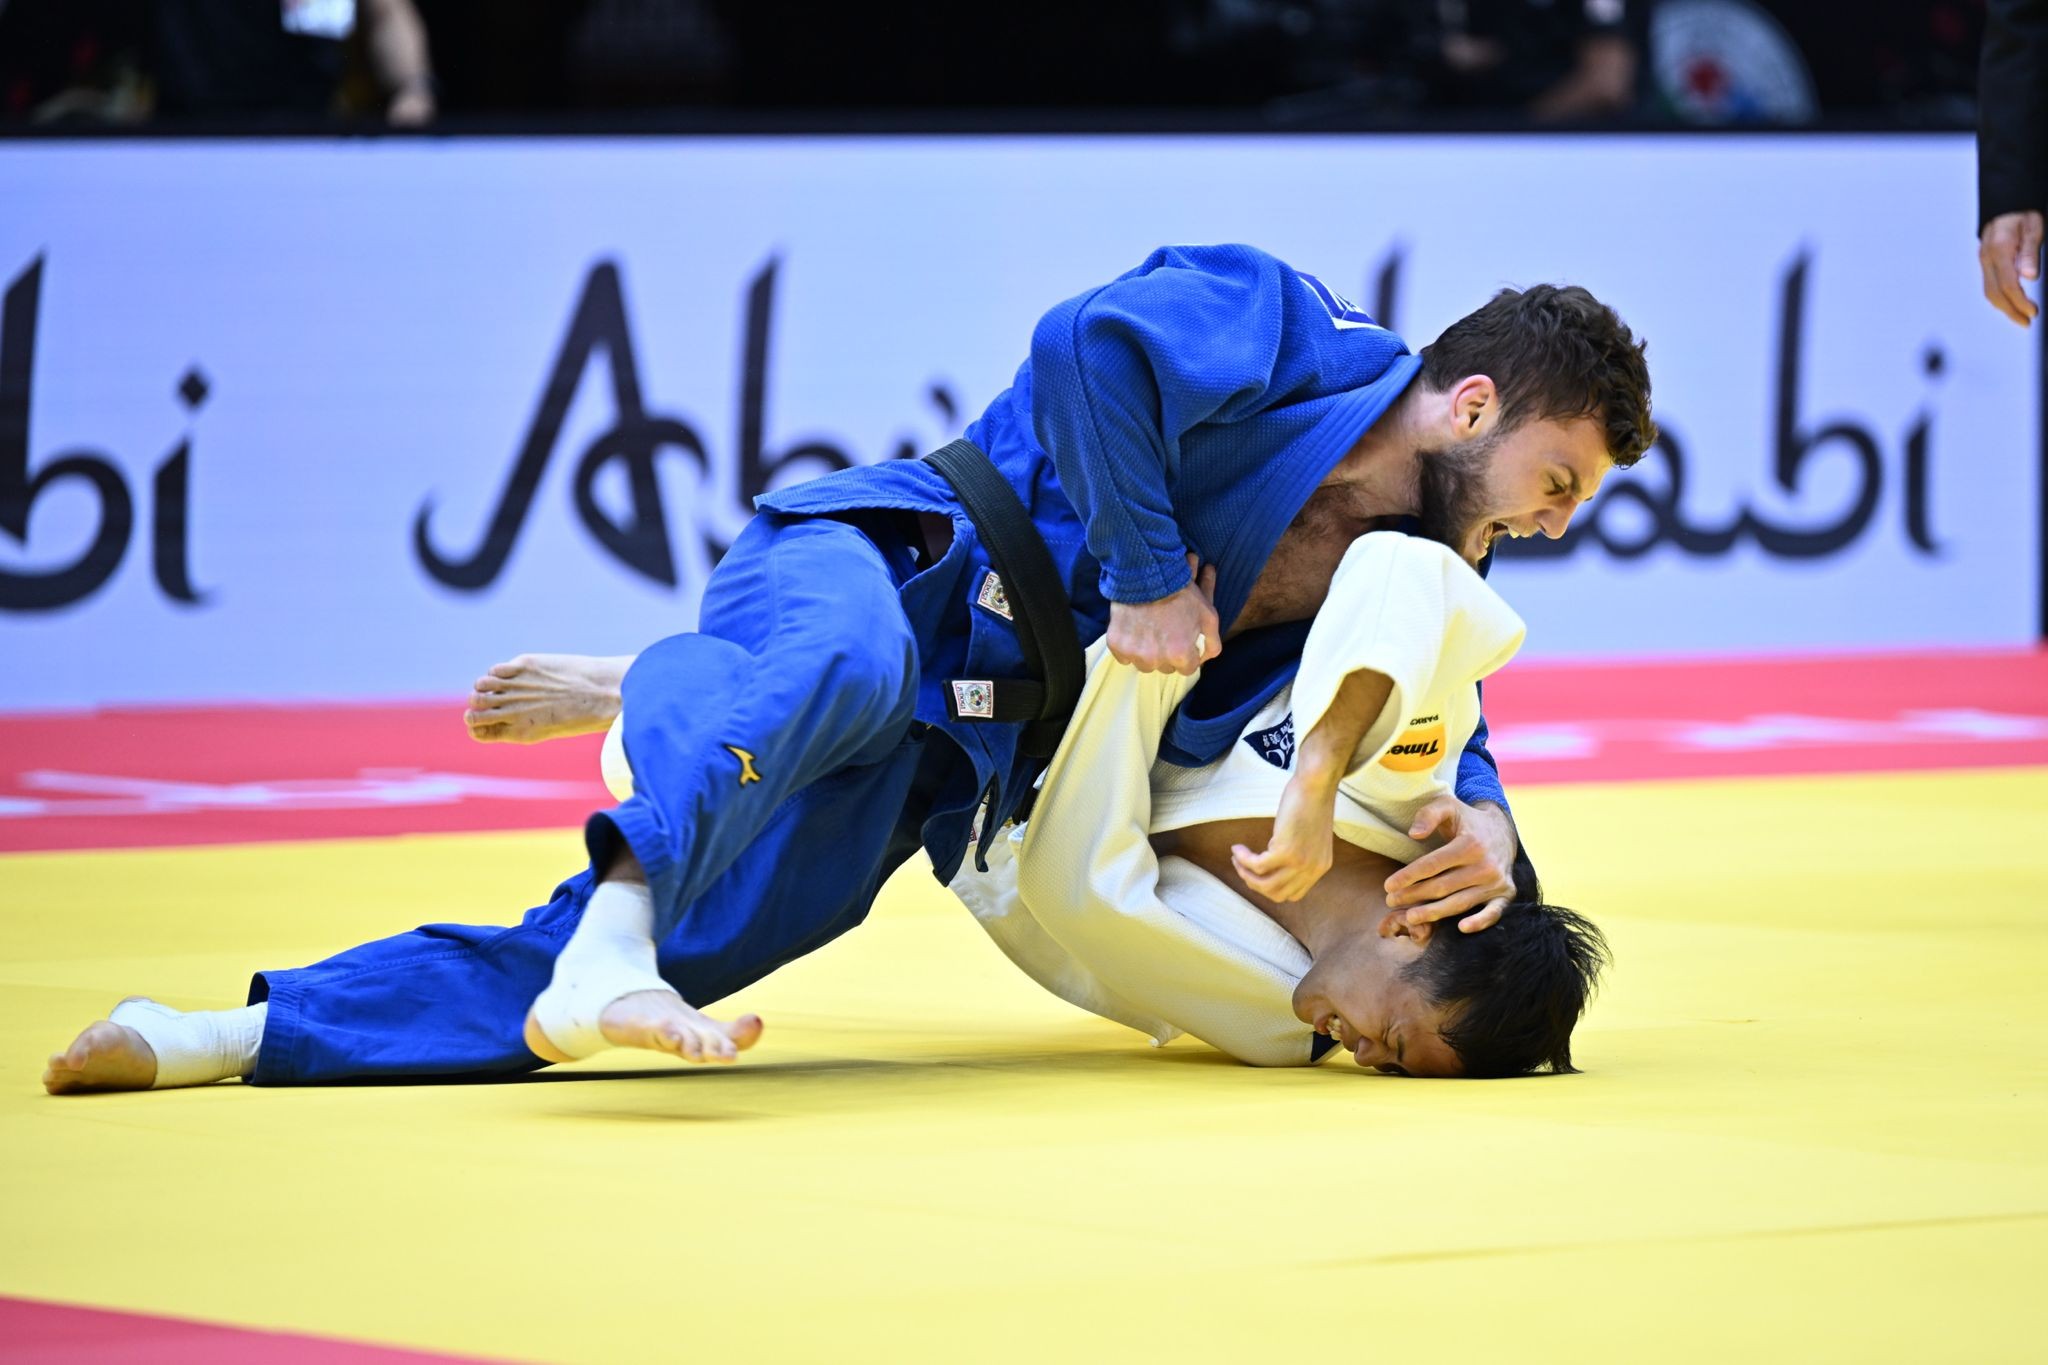 Nagayama’s Quest for First World Title Delayed Further